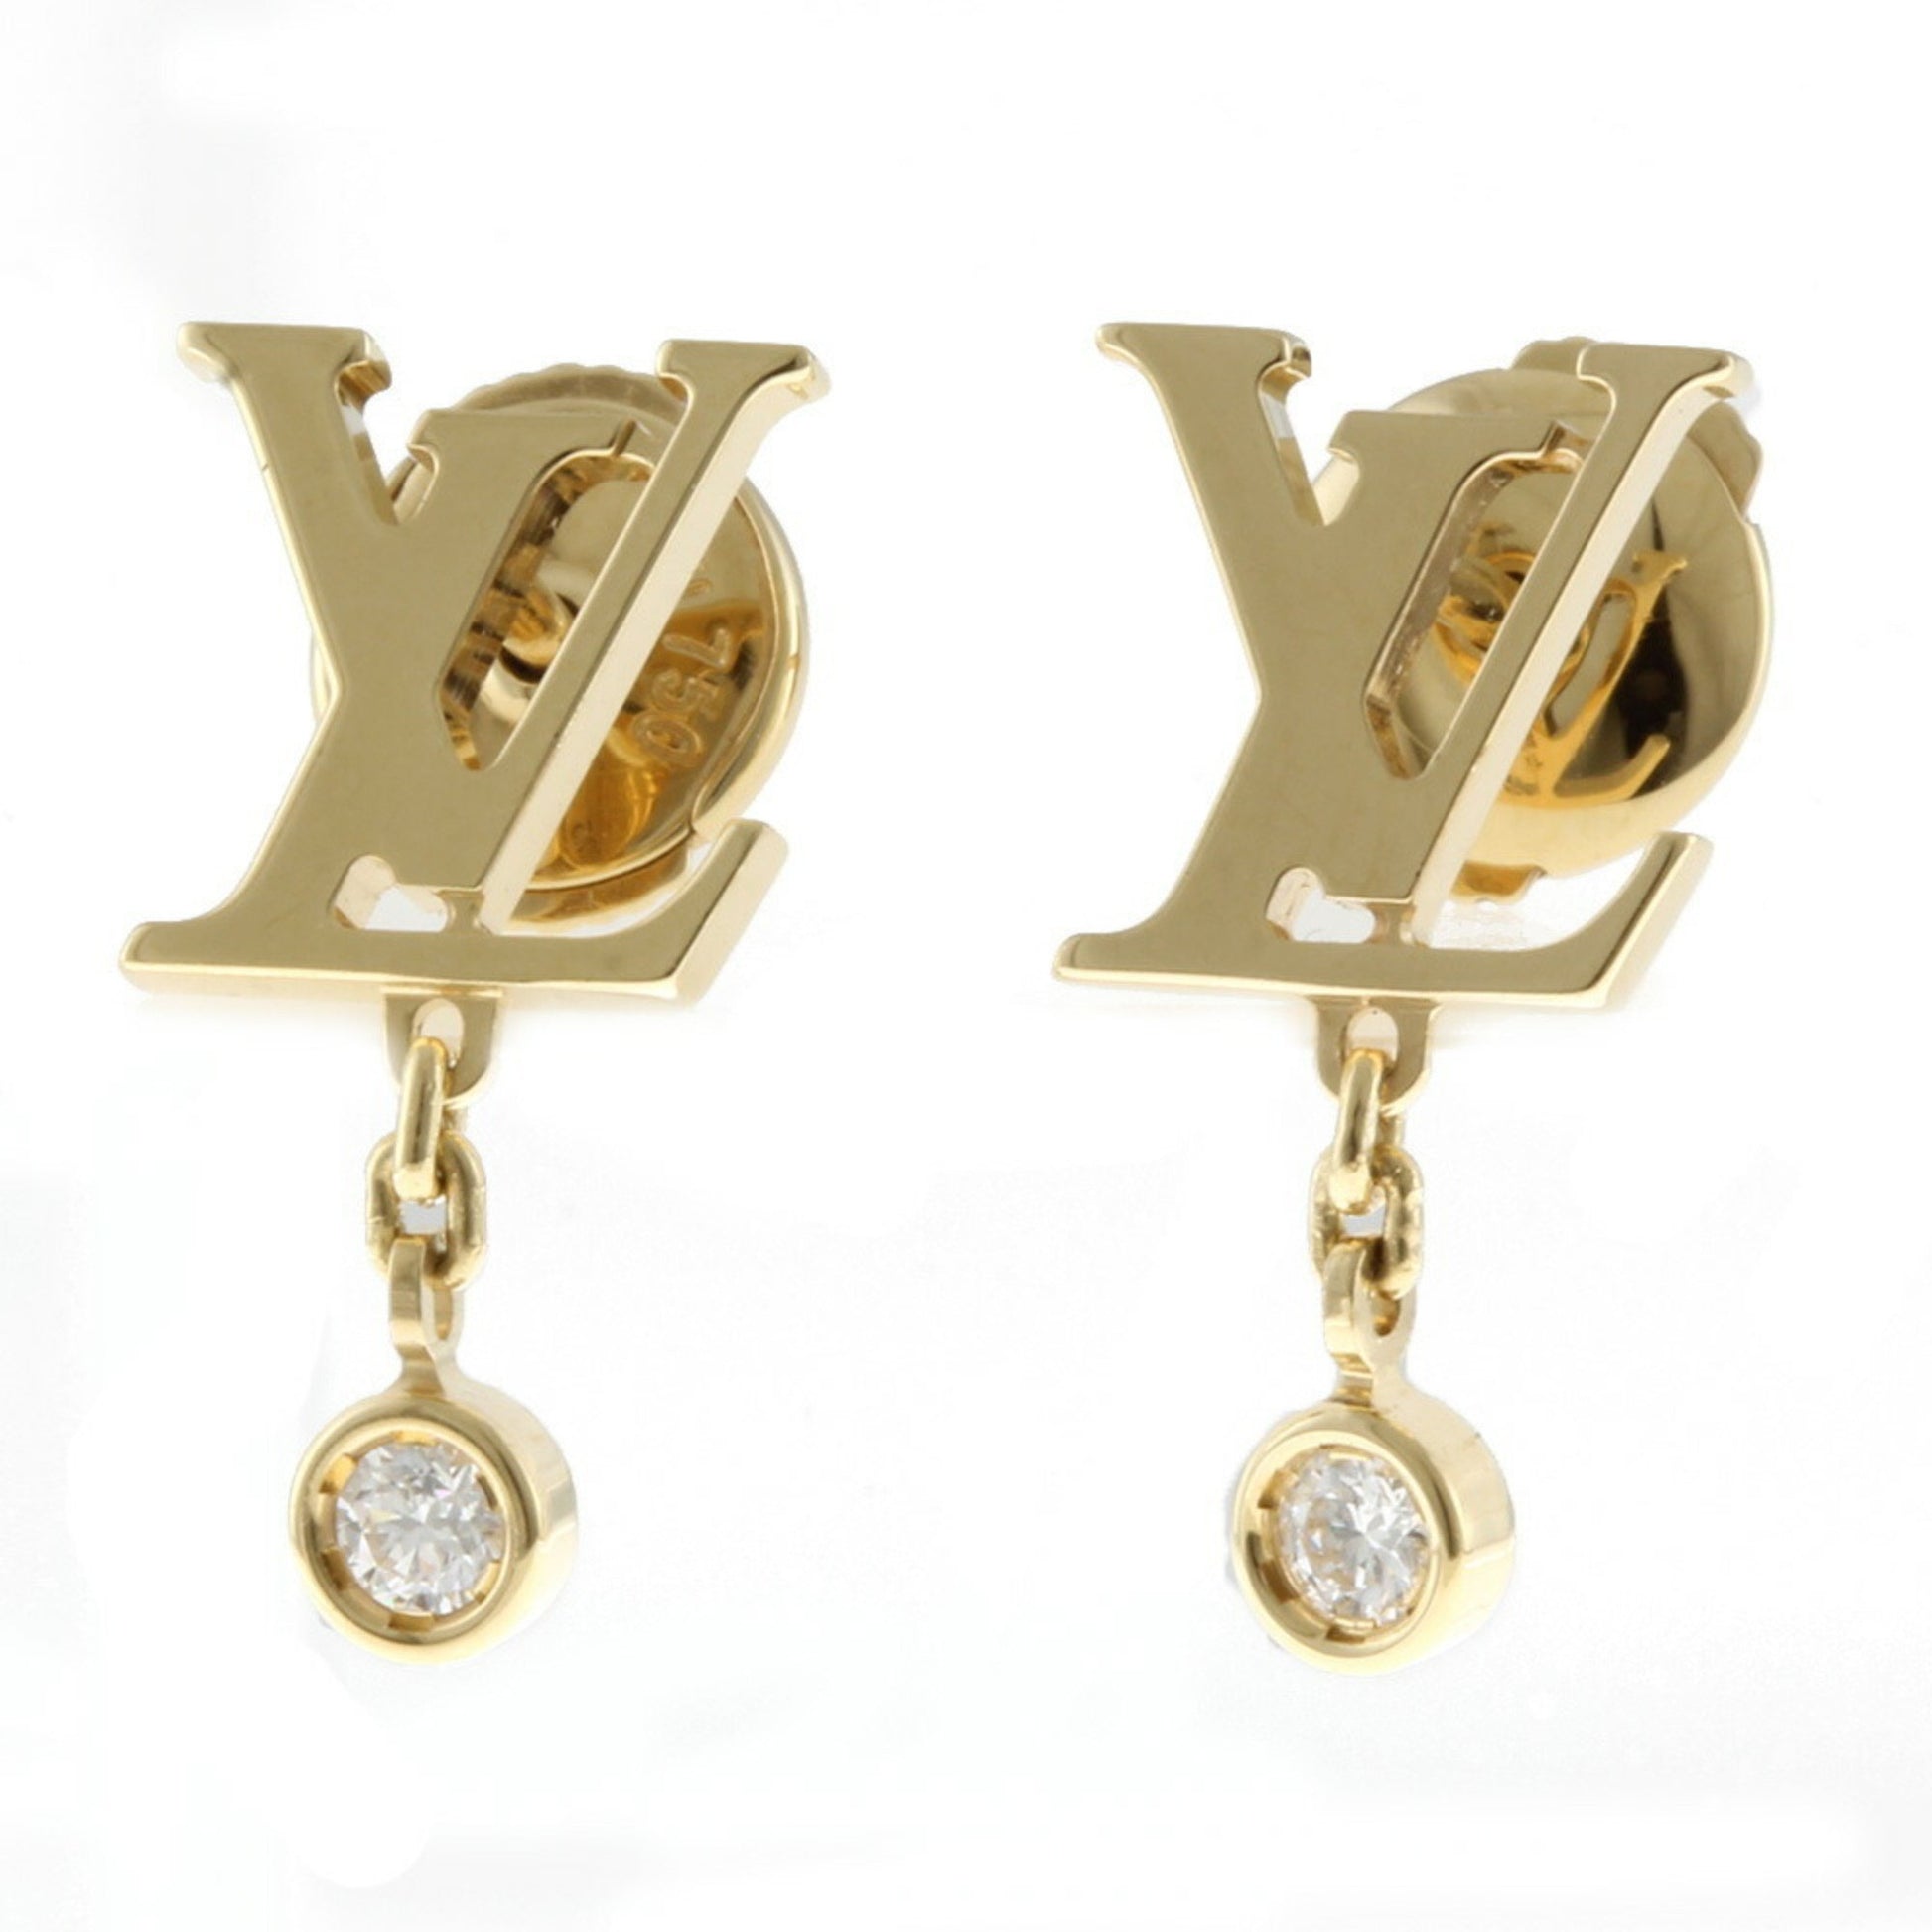 LOUIS VUITTON Pus Idile Blossom Earrings Gold hardware Yellow gold